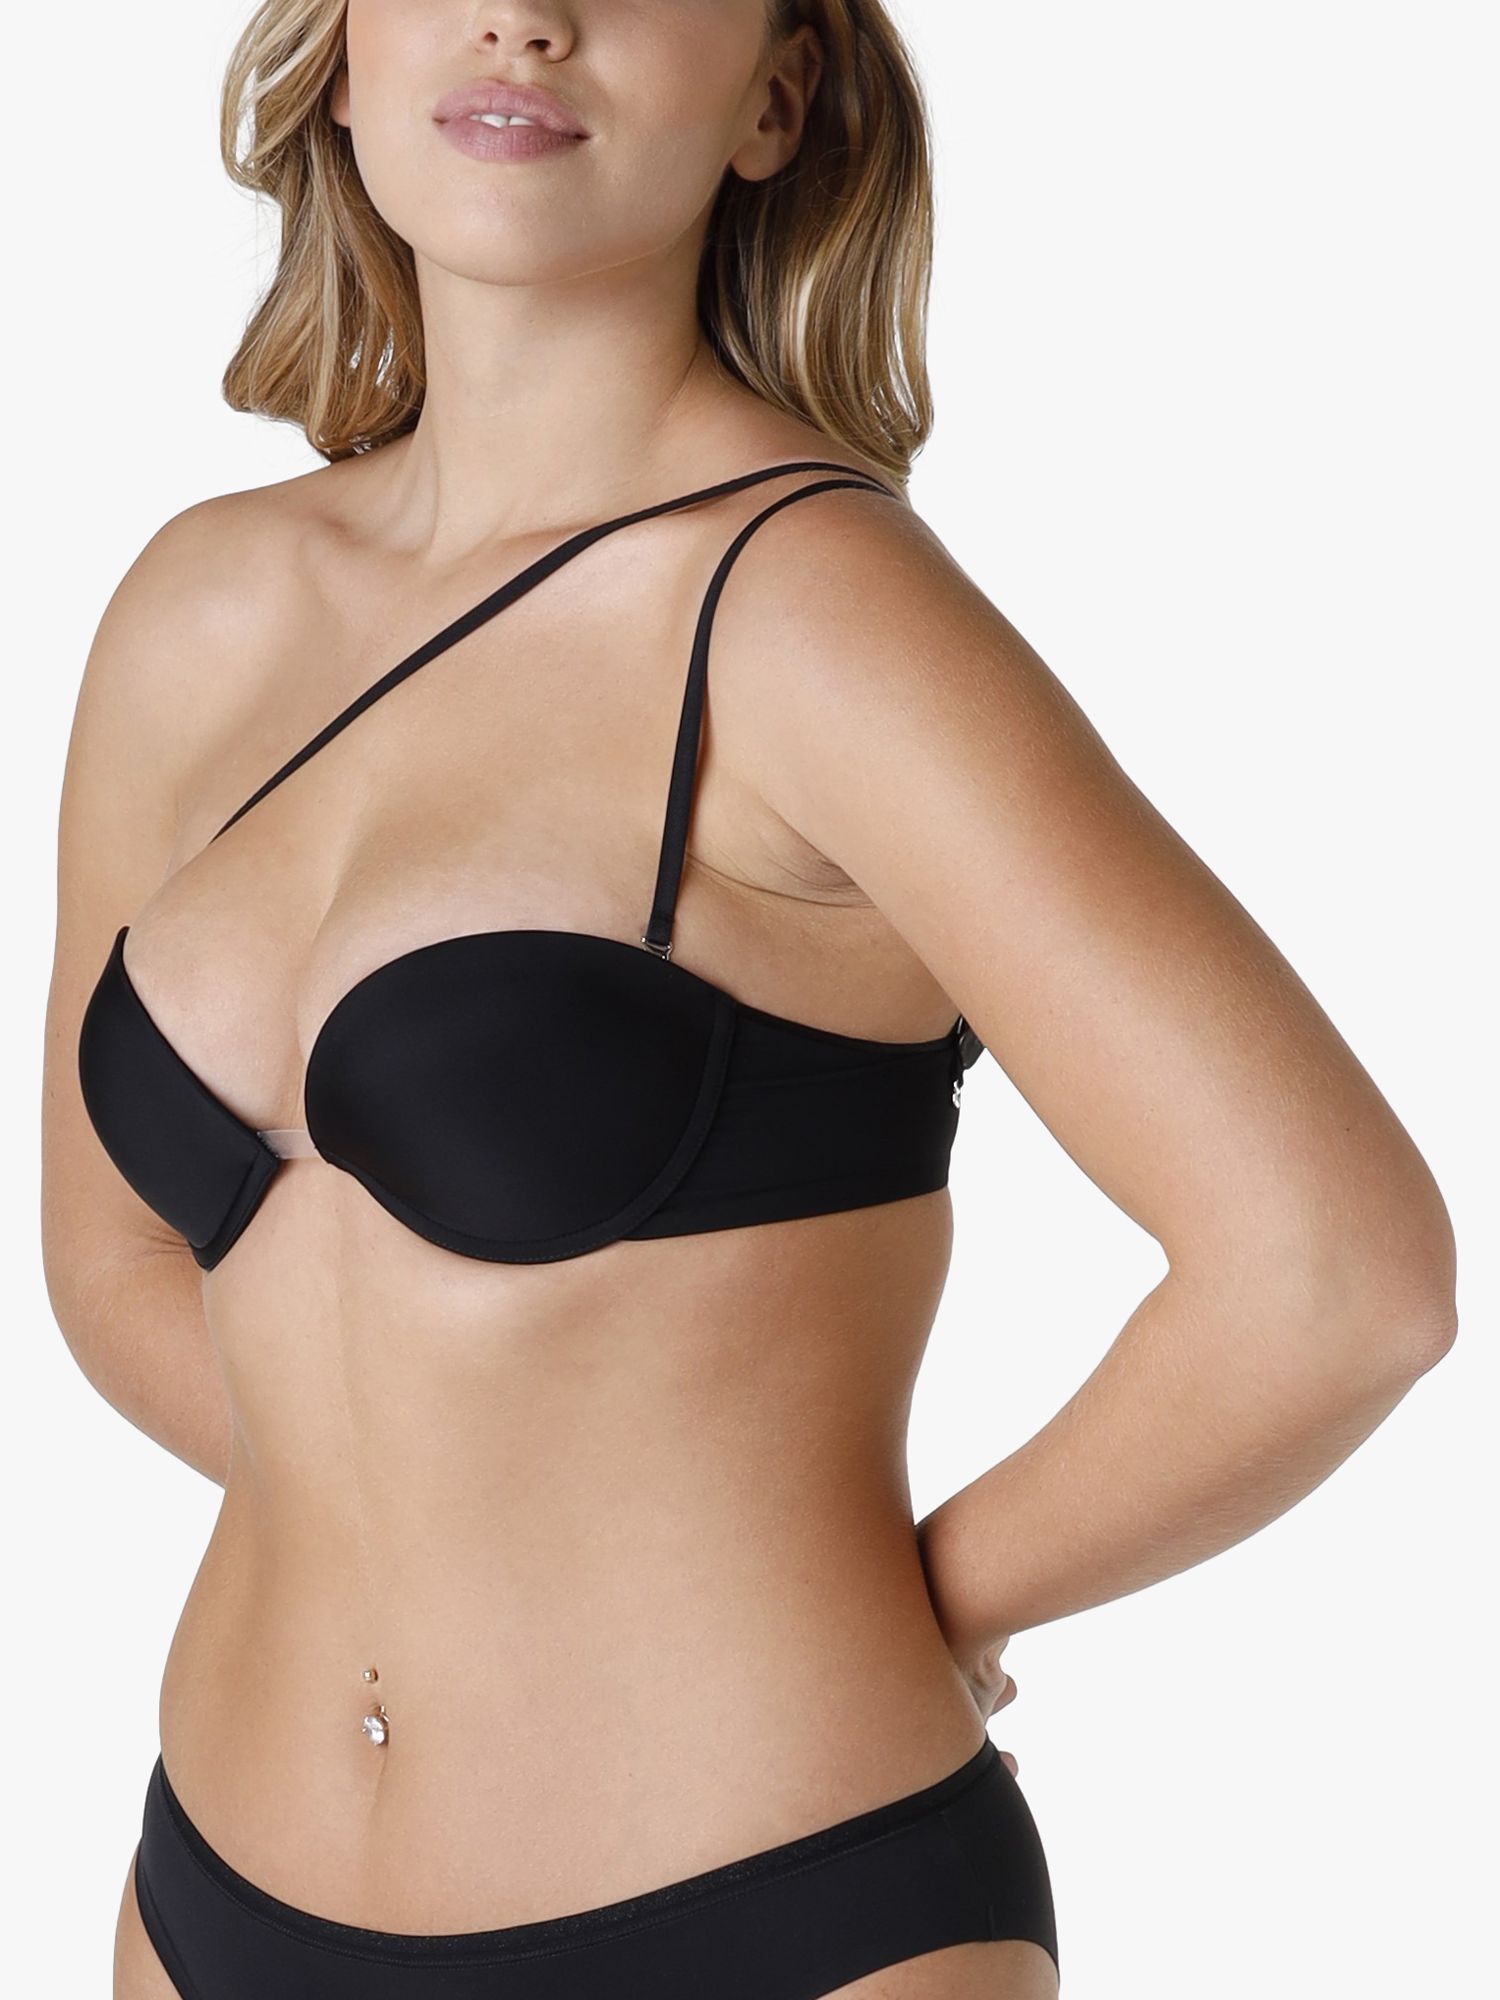 Average Size Figure Types in 38B Bra Size A Cup Sizes Nude Moulded,  Seamless and Smoothing Bras